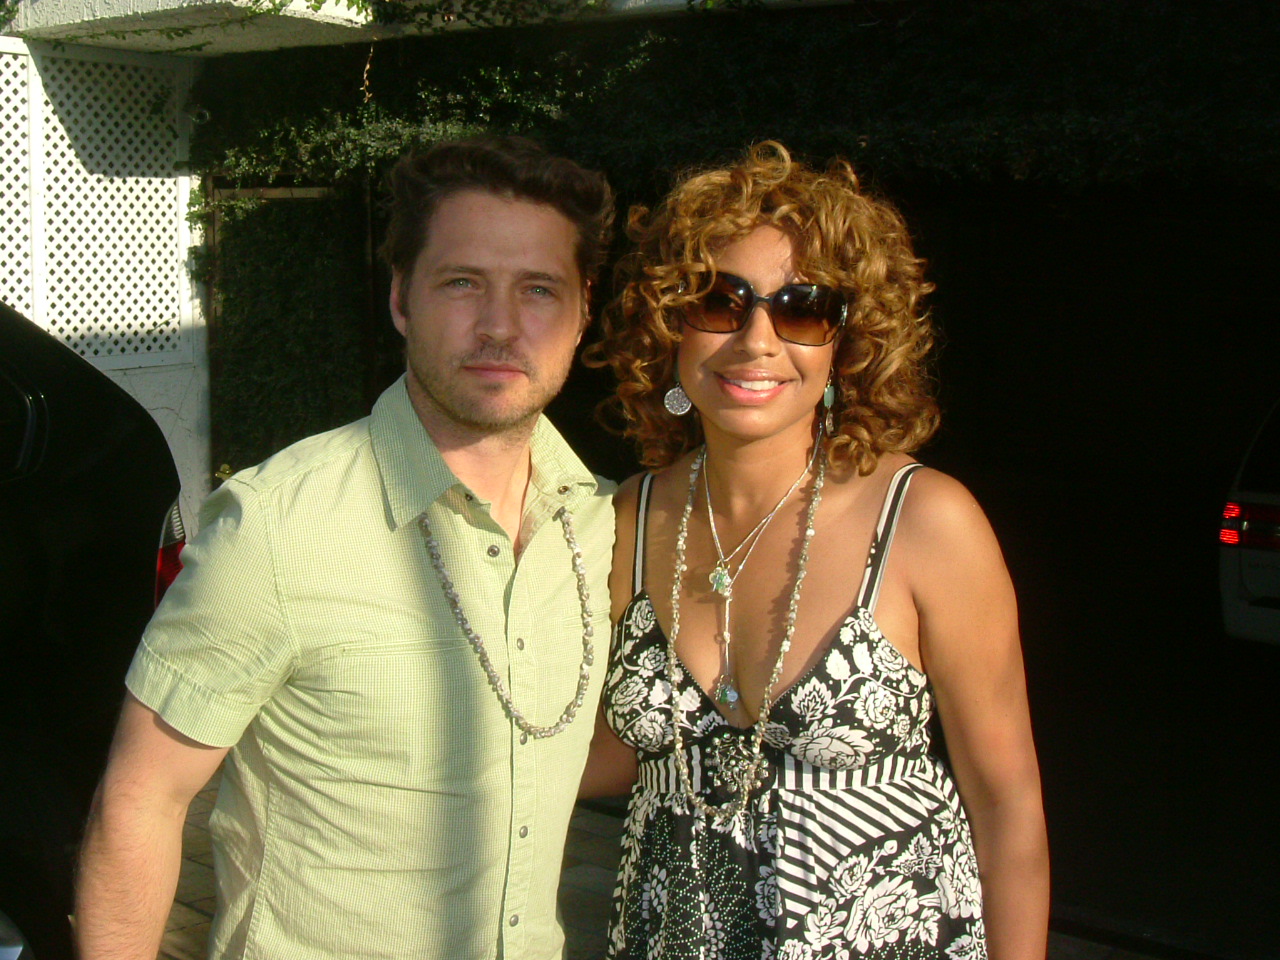 Jason Priestly and Wynne Wharff at the MTV Gifting Lounge 2008.